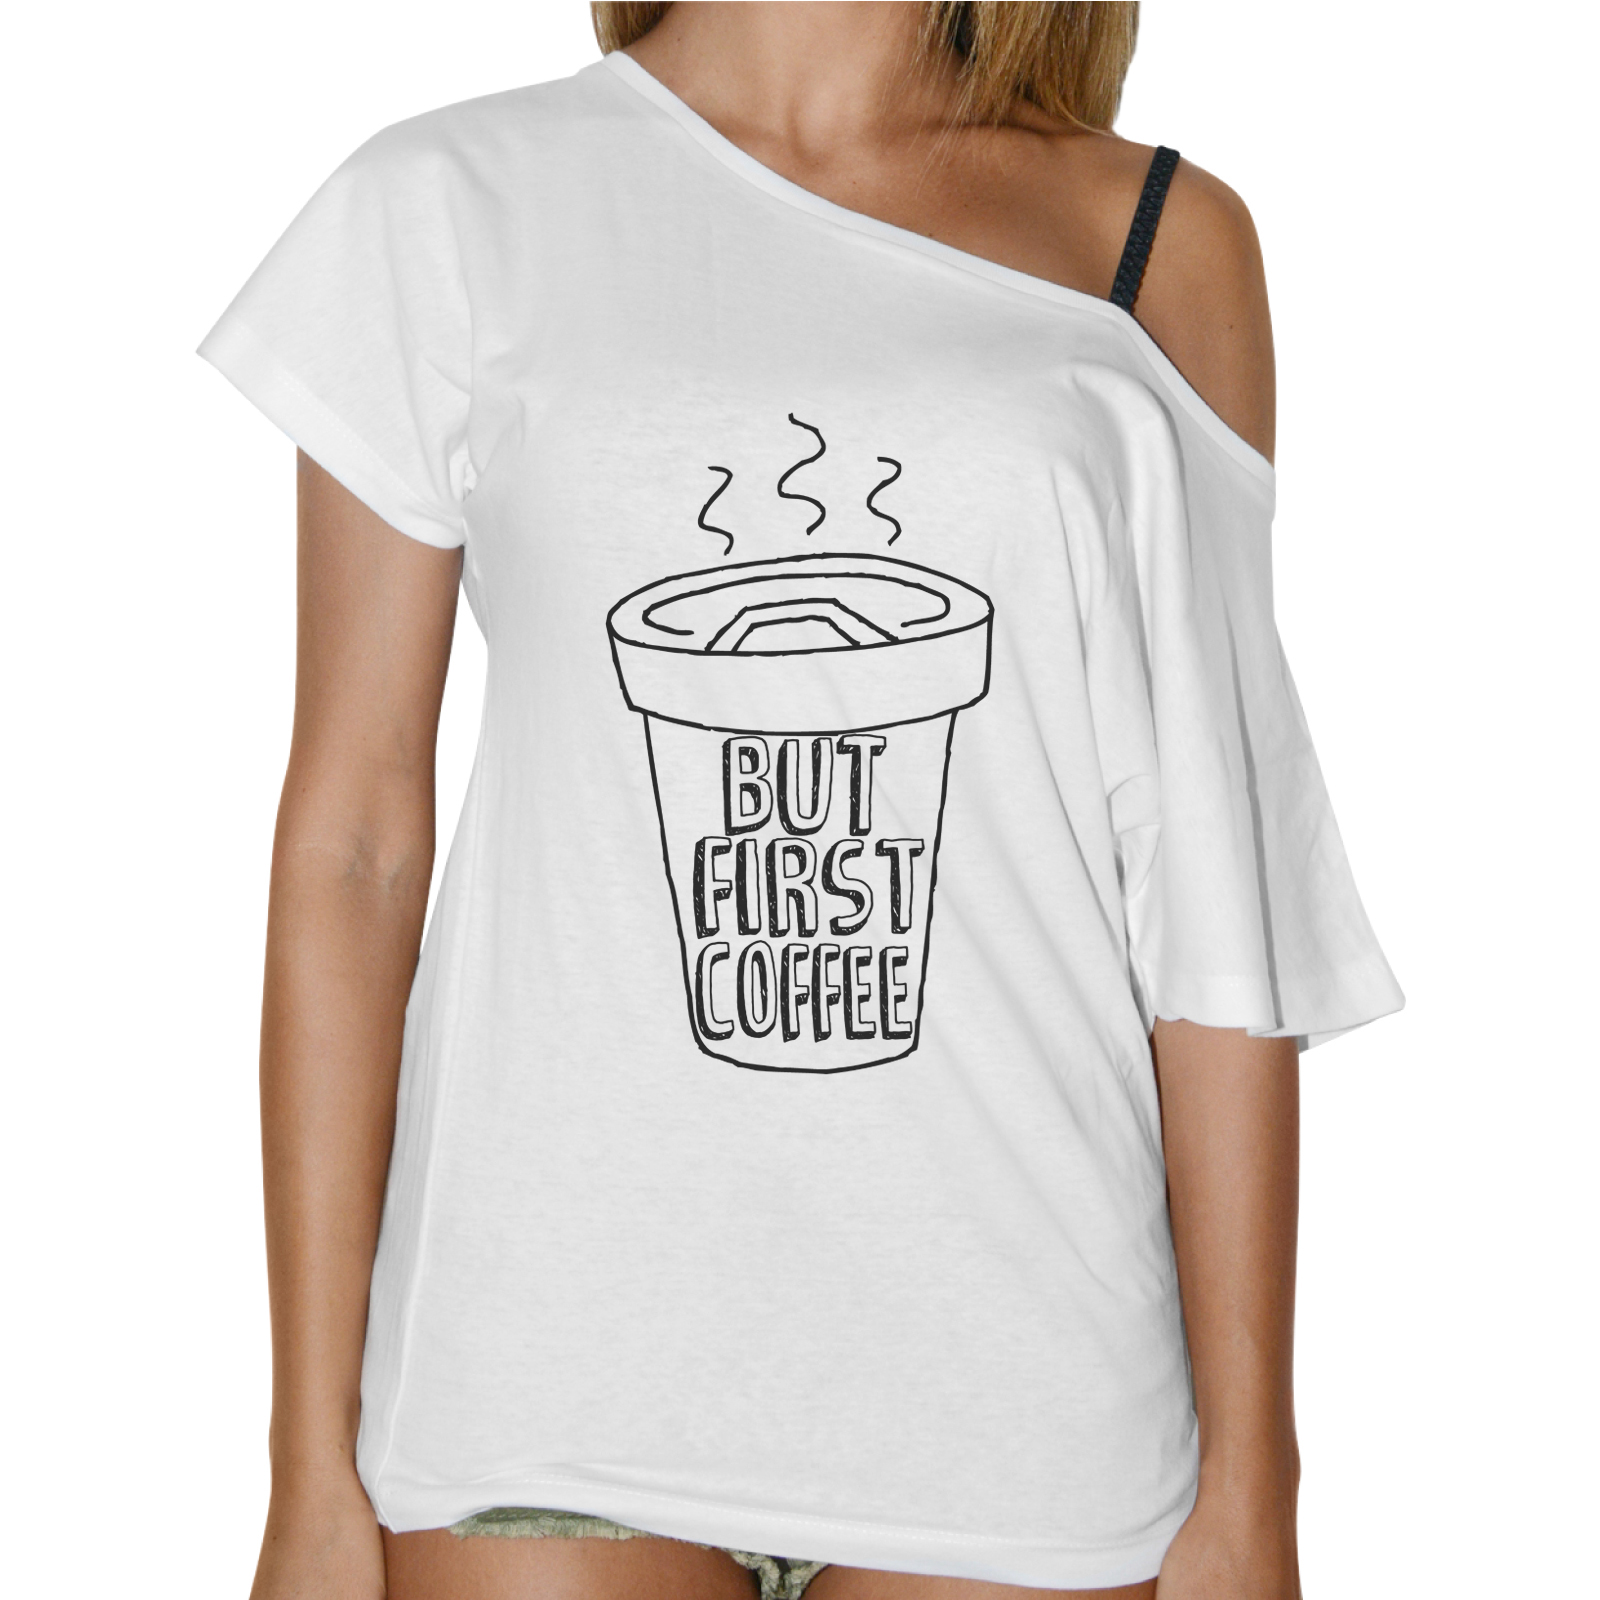 T-Shirt Donna Collo Barca BUT FIRST COFFEE